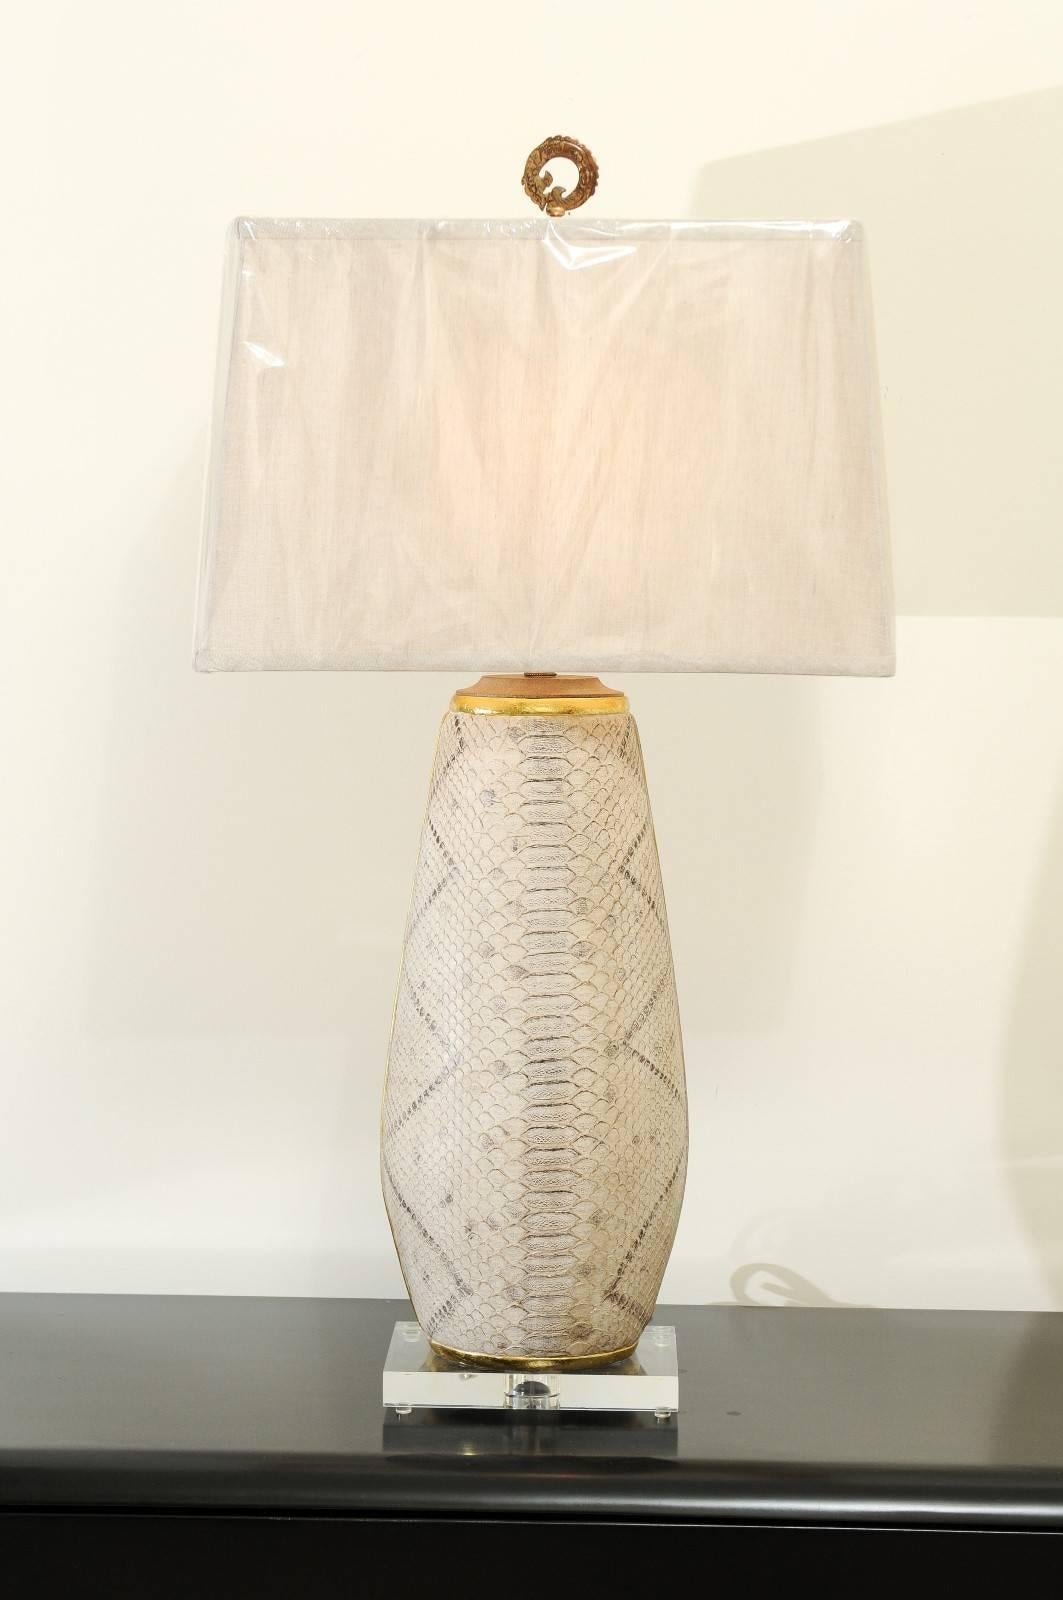 A fabulous pair of handmade faux-snakeskin vessels as custom-made lamps. Handsome wood form, leather wrapped and hand-painted to portray the look of snakeskin. Gold leaf accents. Stunning scale, color and texture. Built using only components of the